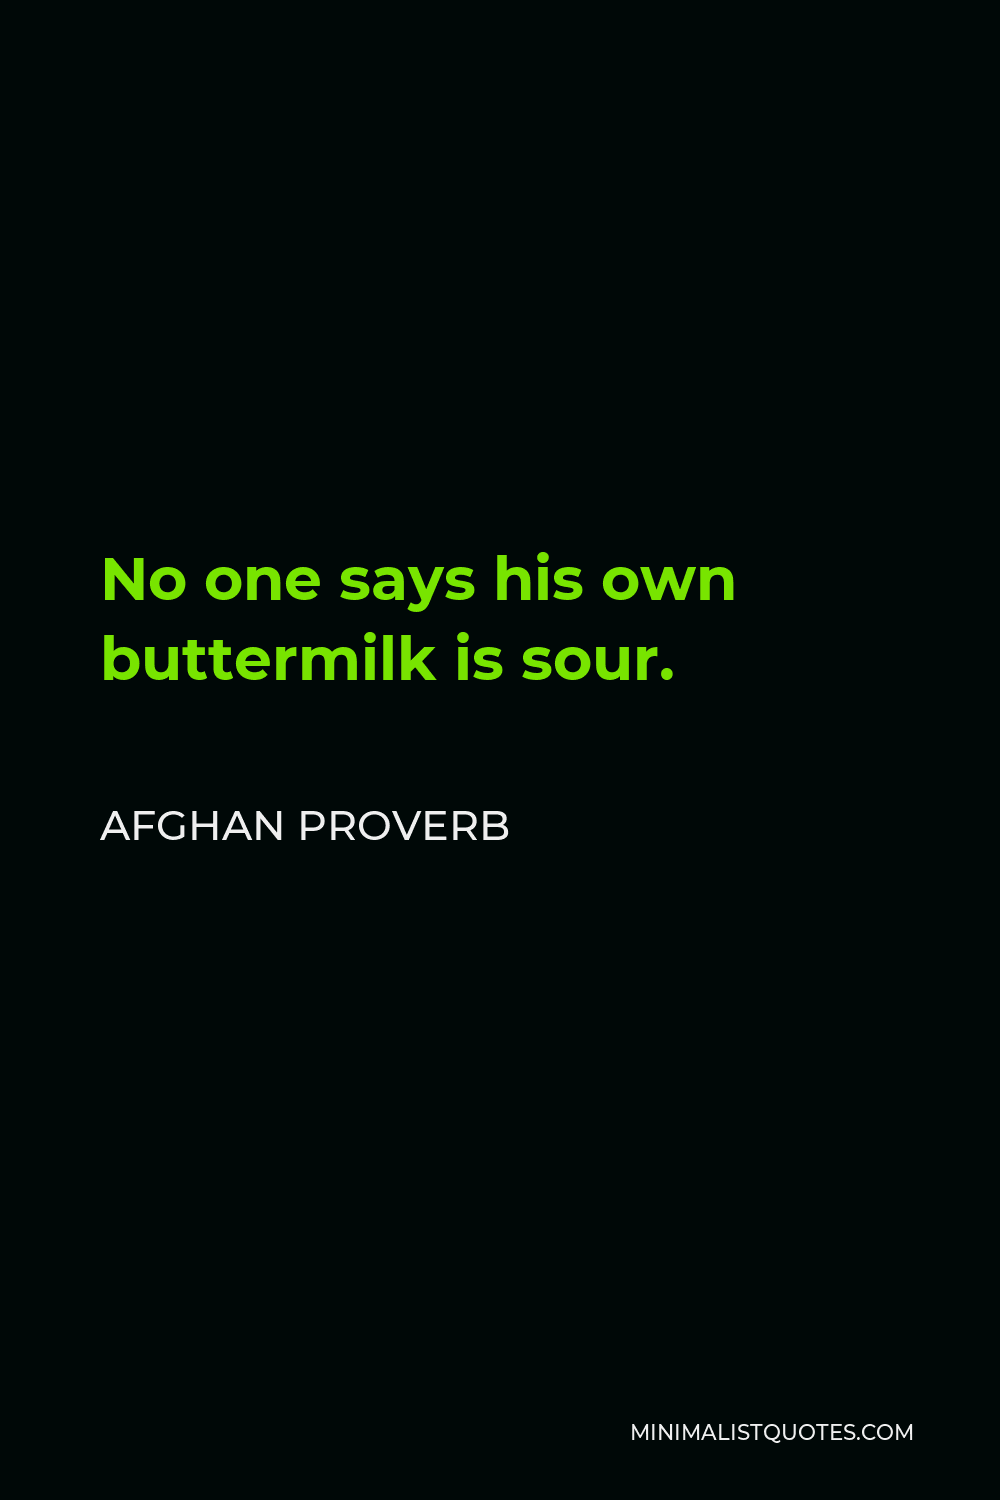 Afghan Proverb Quote - No one says his own buttermilk is sour.